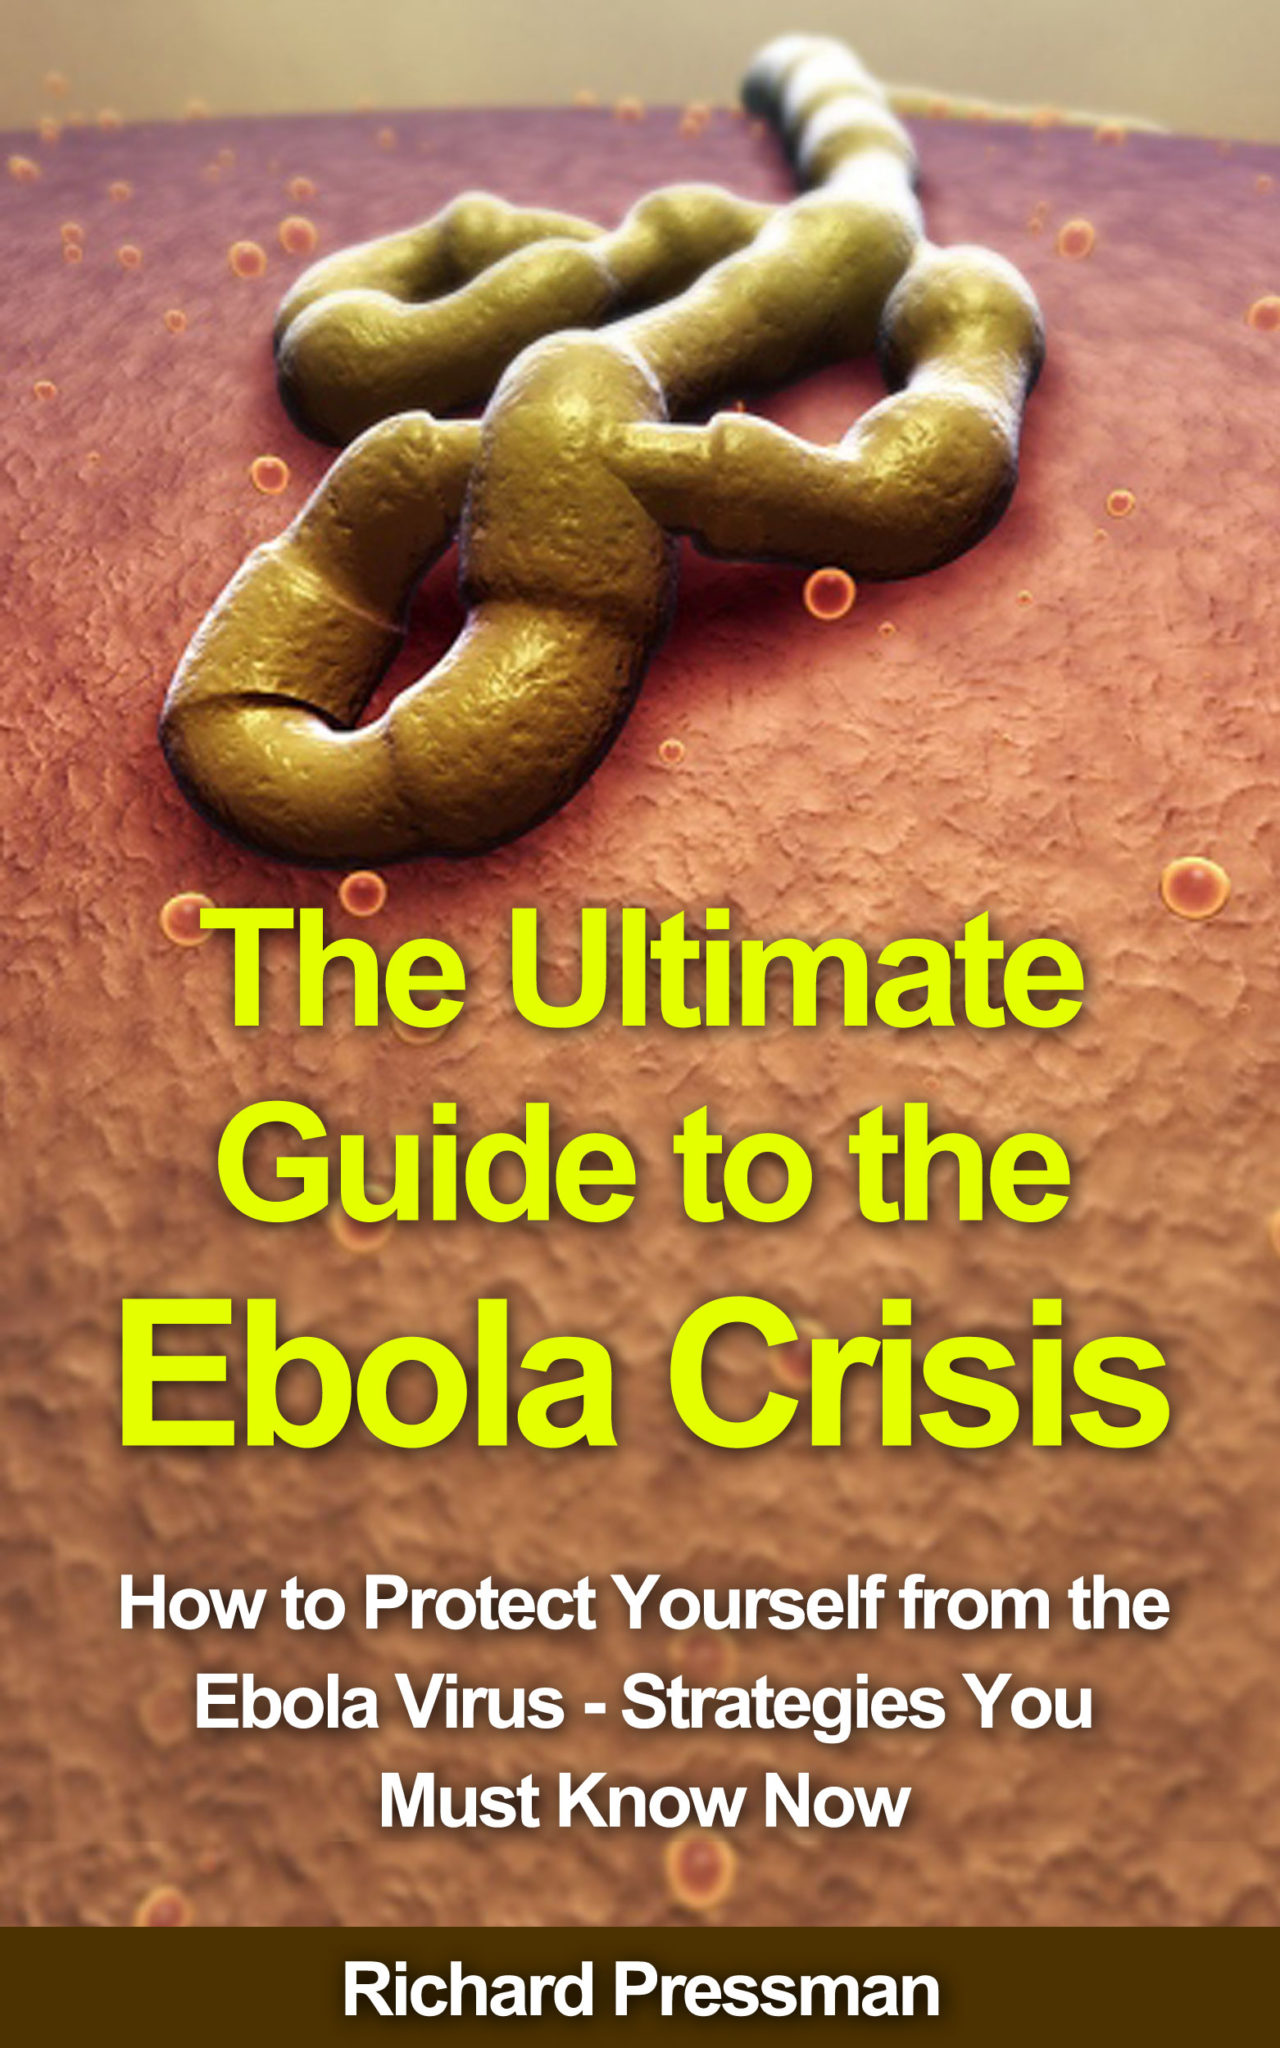 The Ultimate Guide to the Ebola Crisis: How to Protect Yourself from the Ebola Virus – Strategies You Must Know Now by Richard Pressman